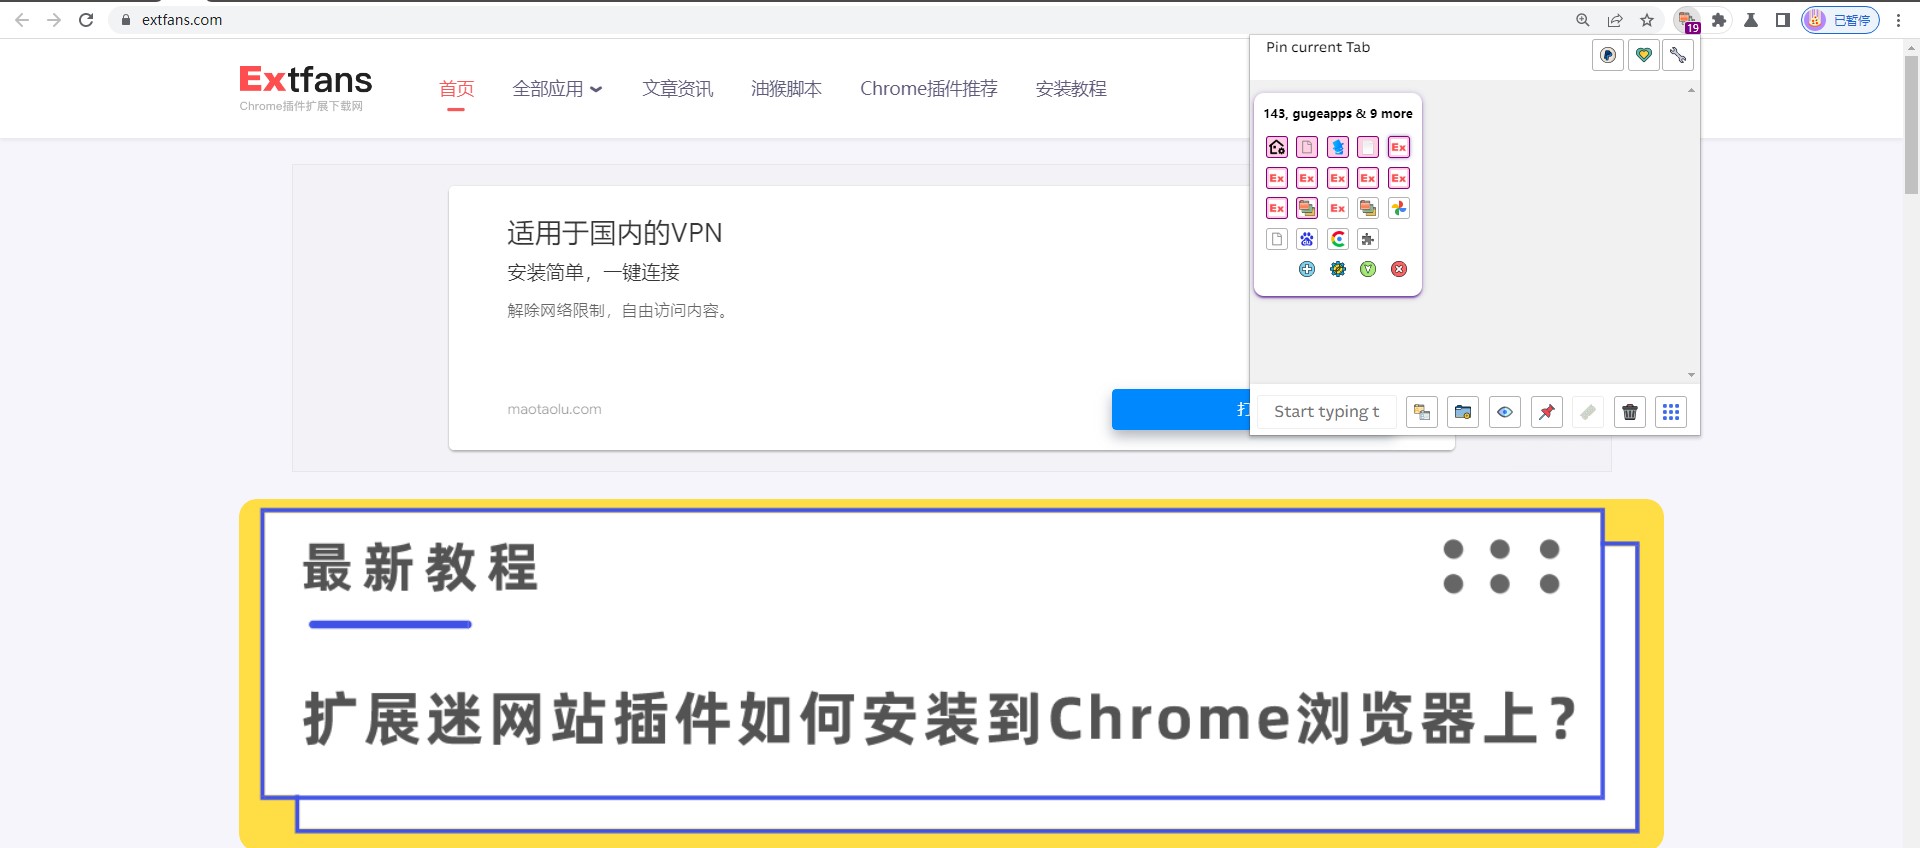 Tab Manager Plus for Chrome 插件使用教程